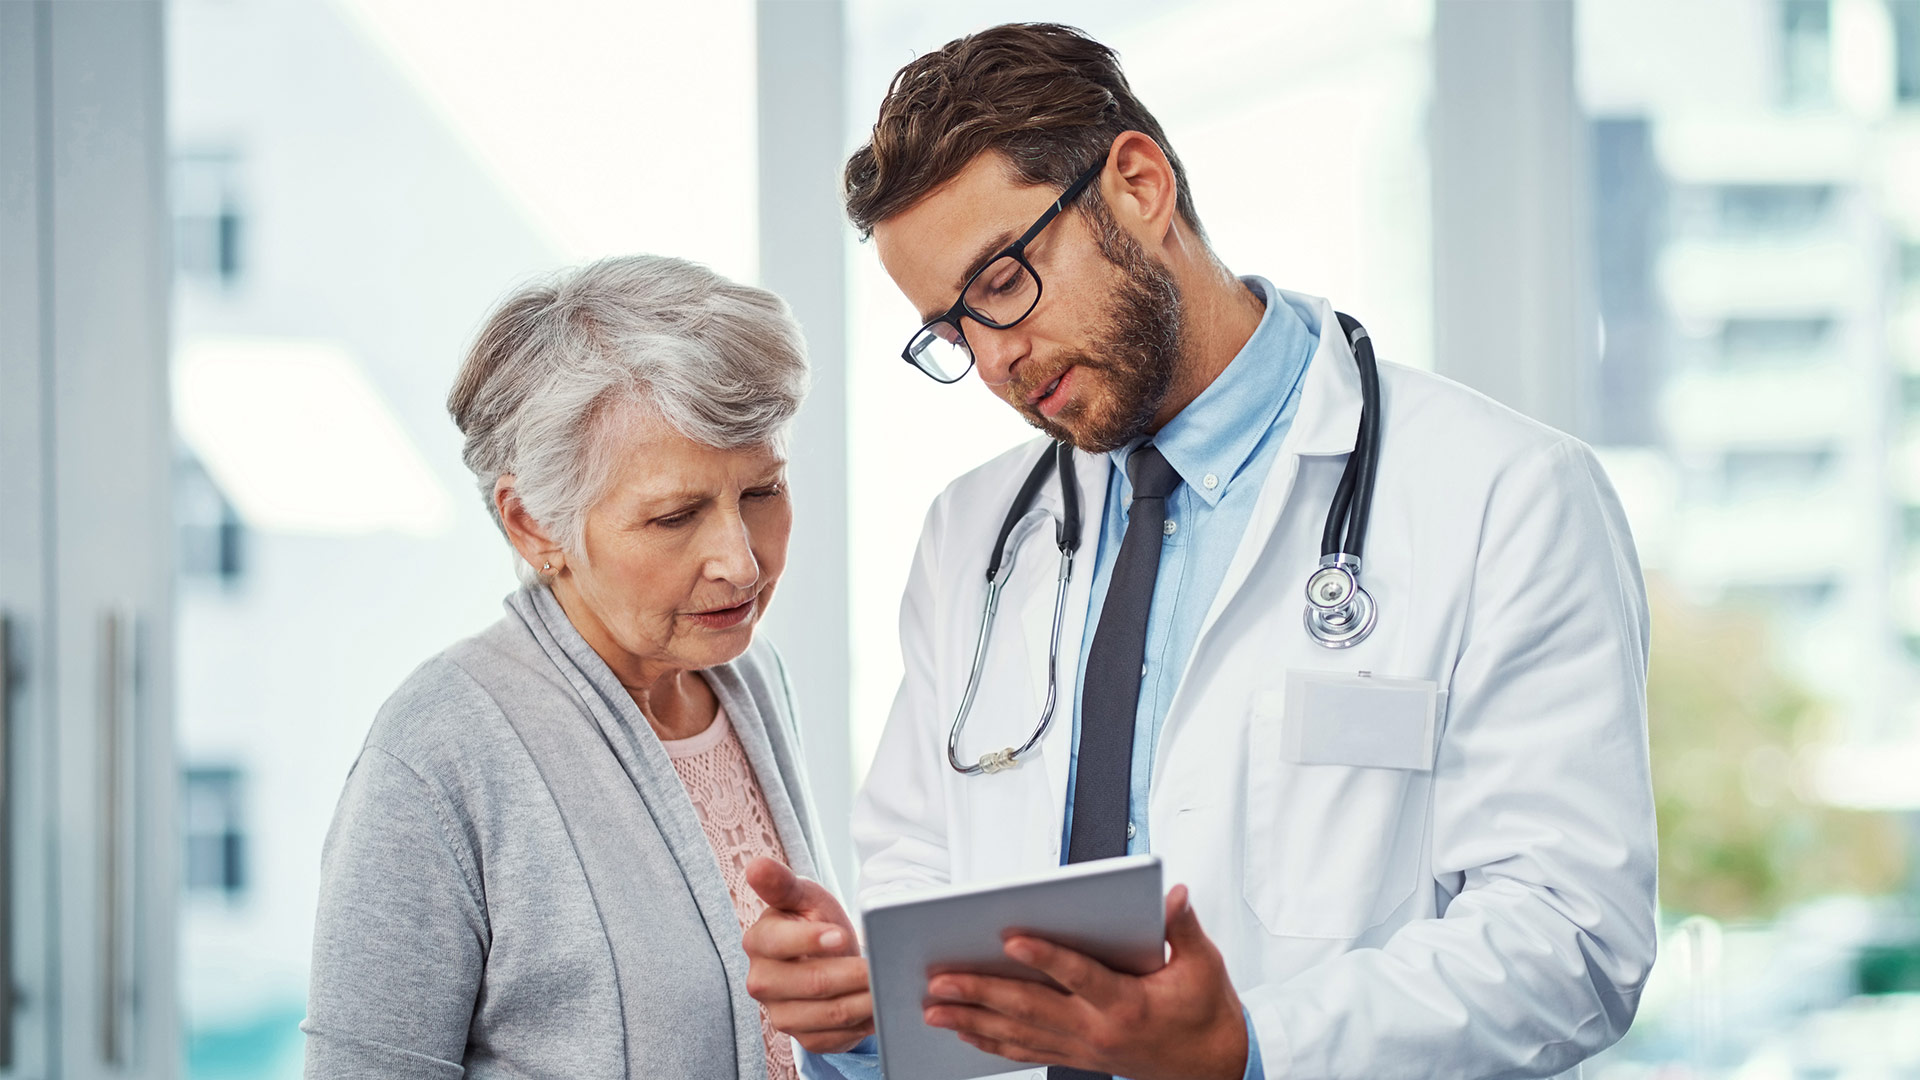 According to the Institute for Healthcare Improvement (IHI), one in five adults say they’ve experienced a medical error. The majority of medical errors are 100 percent preventable – especially if patients and their caregivers speak up when something doesn’t seem right.  